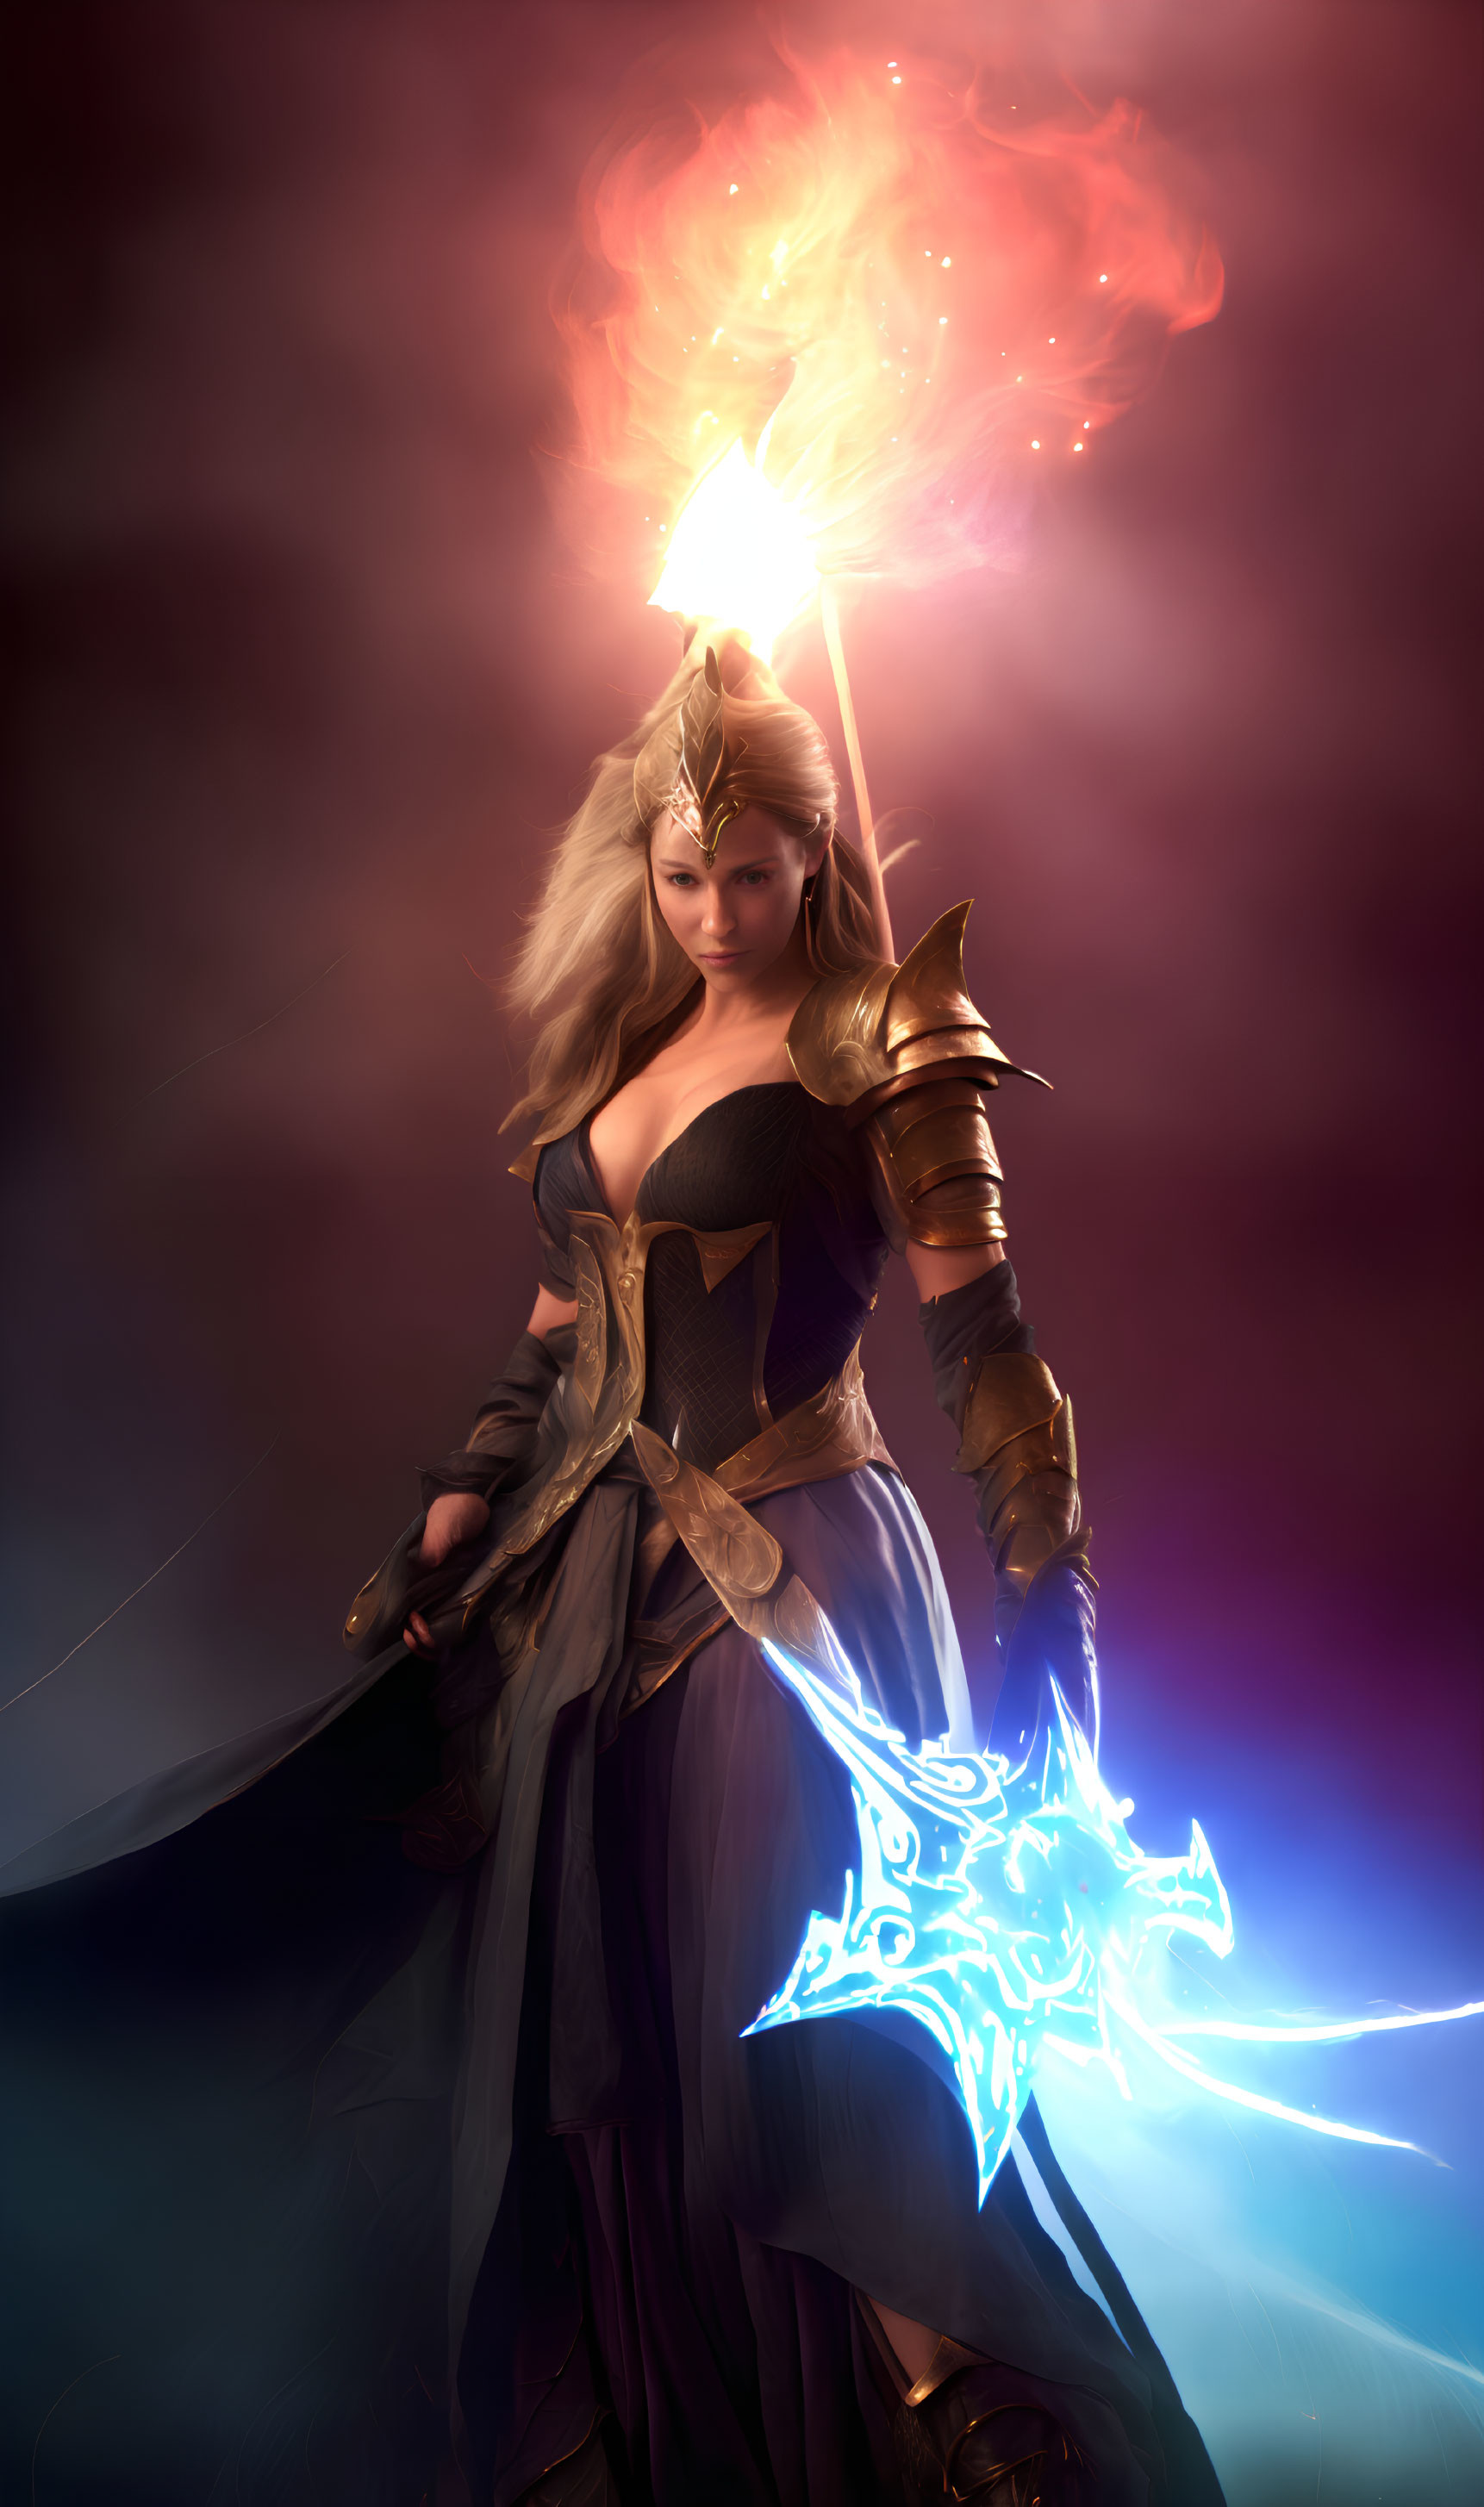 Female warrior with glowing blue axe and fiery torch in golden armor on dramatic red and purple backdrop